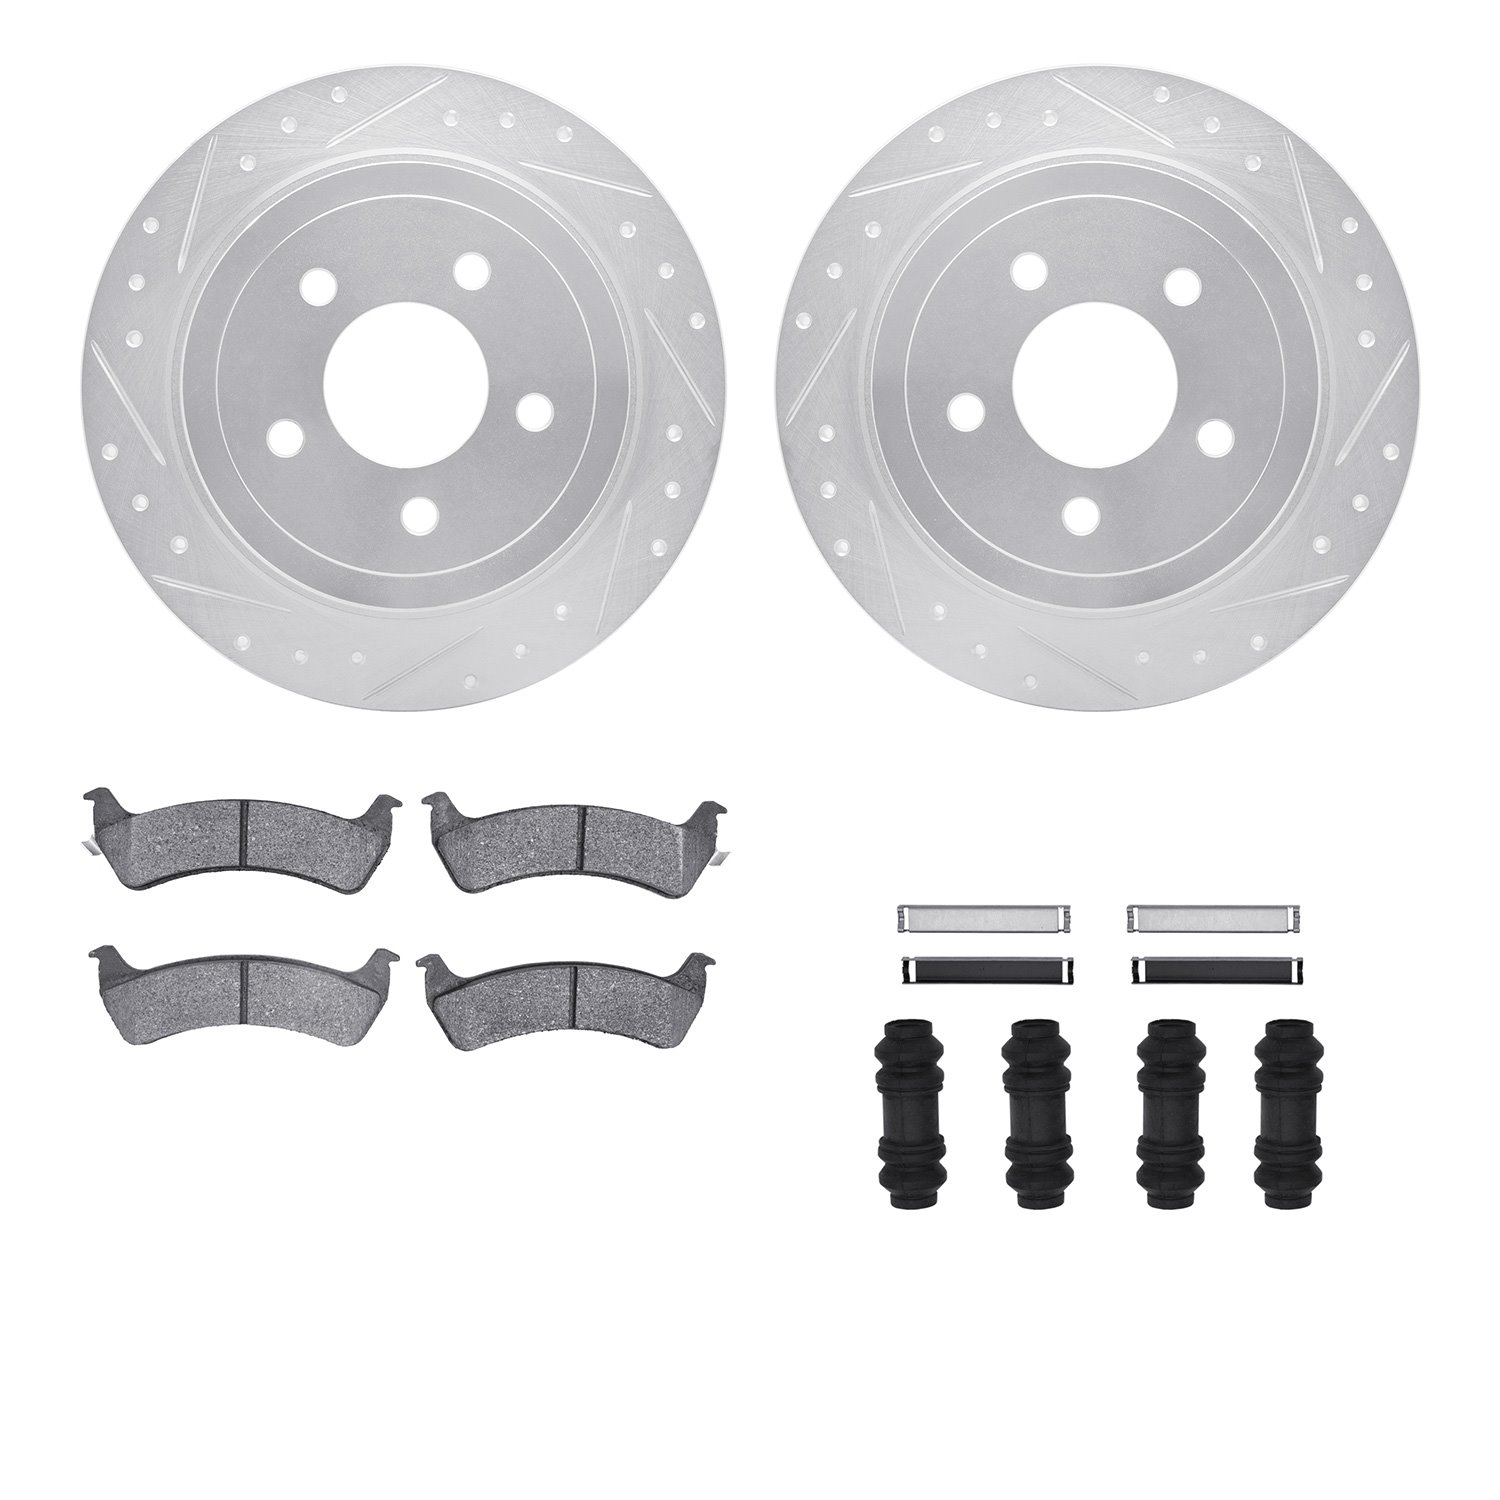 7412-54070 Drilled/Slotted Brake Rotors with Ultimate-Duty Brake Pads Kit & Hardware [Silver], 2003-2005 Ford/Lincoln/Mercury/Ma